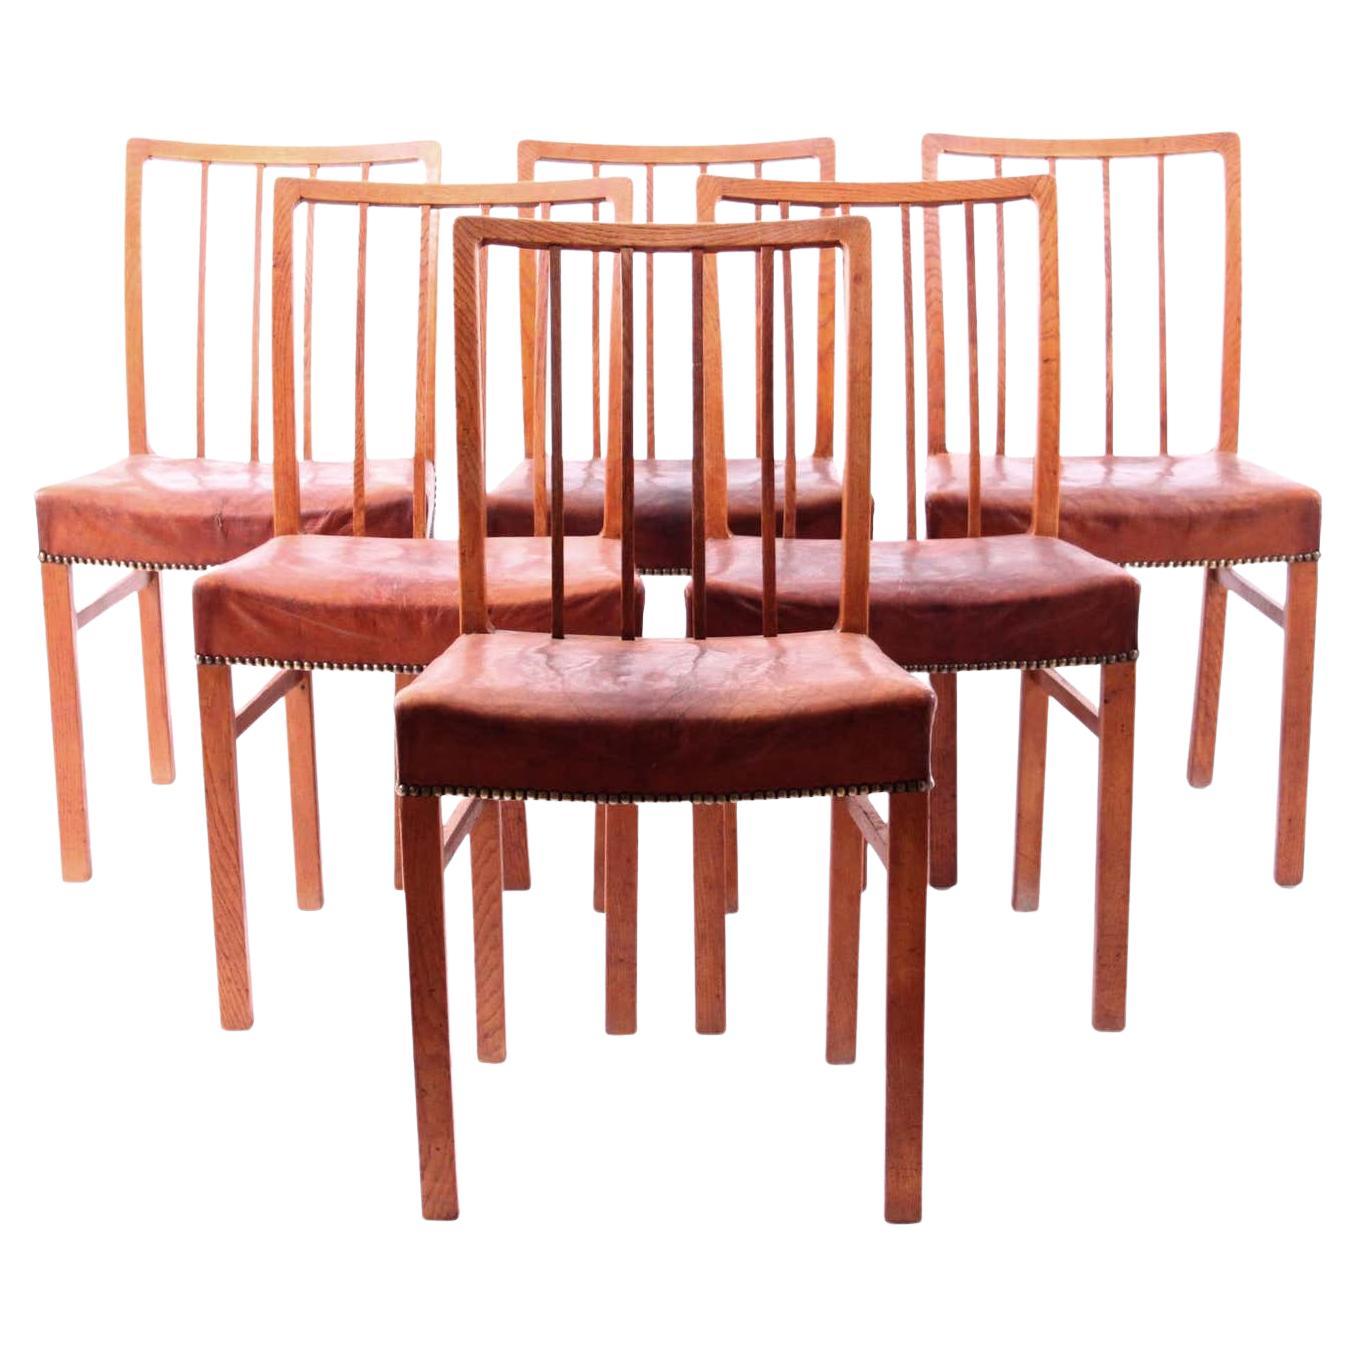 Set of 6 Oak chairs with original patinated Niger leather.

Jacob Kjær (1896–1957) was a Danish furniture designer and cabinetmaker.
Kjær received training as a cabinetmaker in the workshop of his father who was also a furniture maker. After